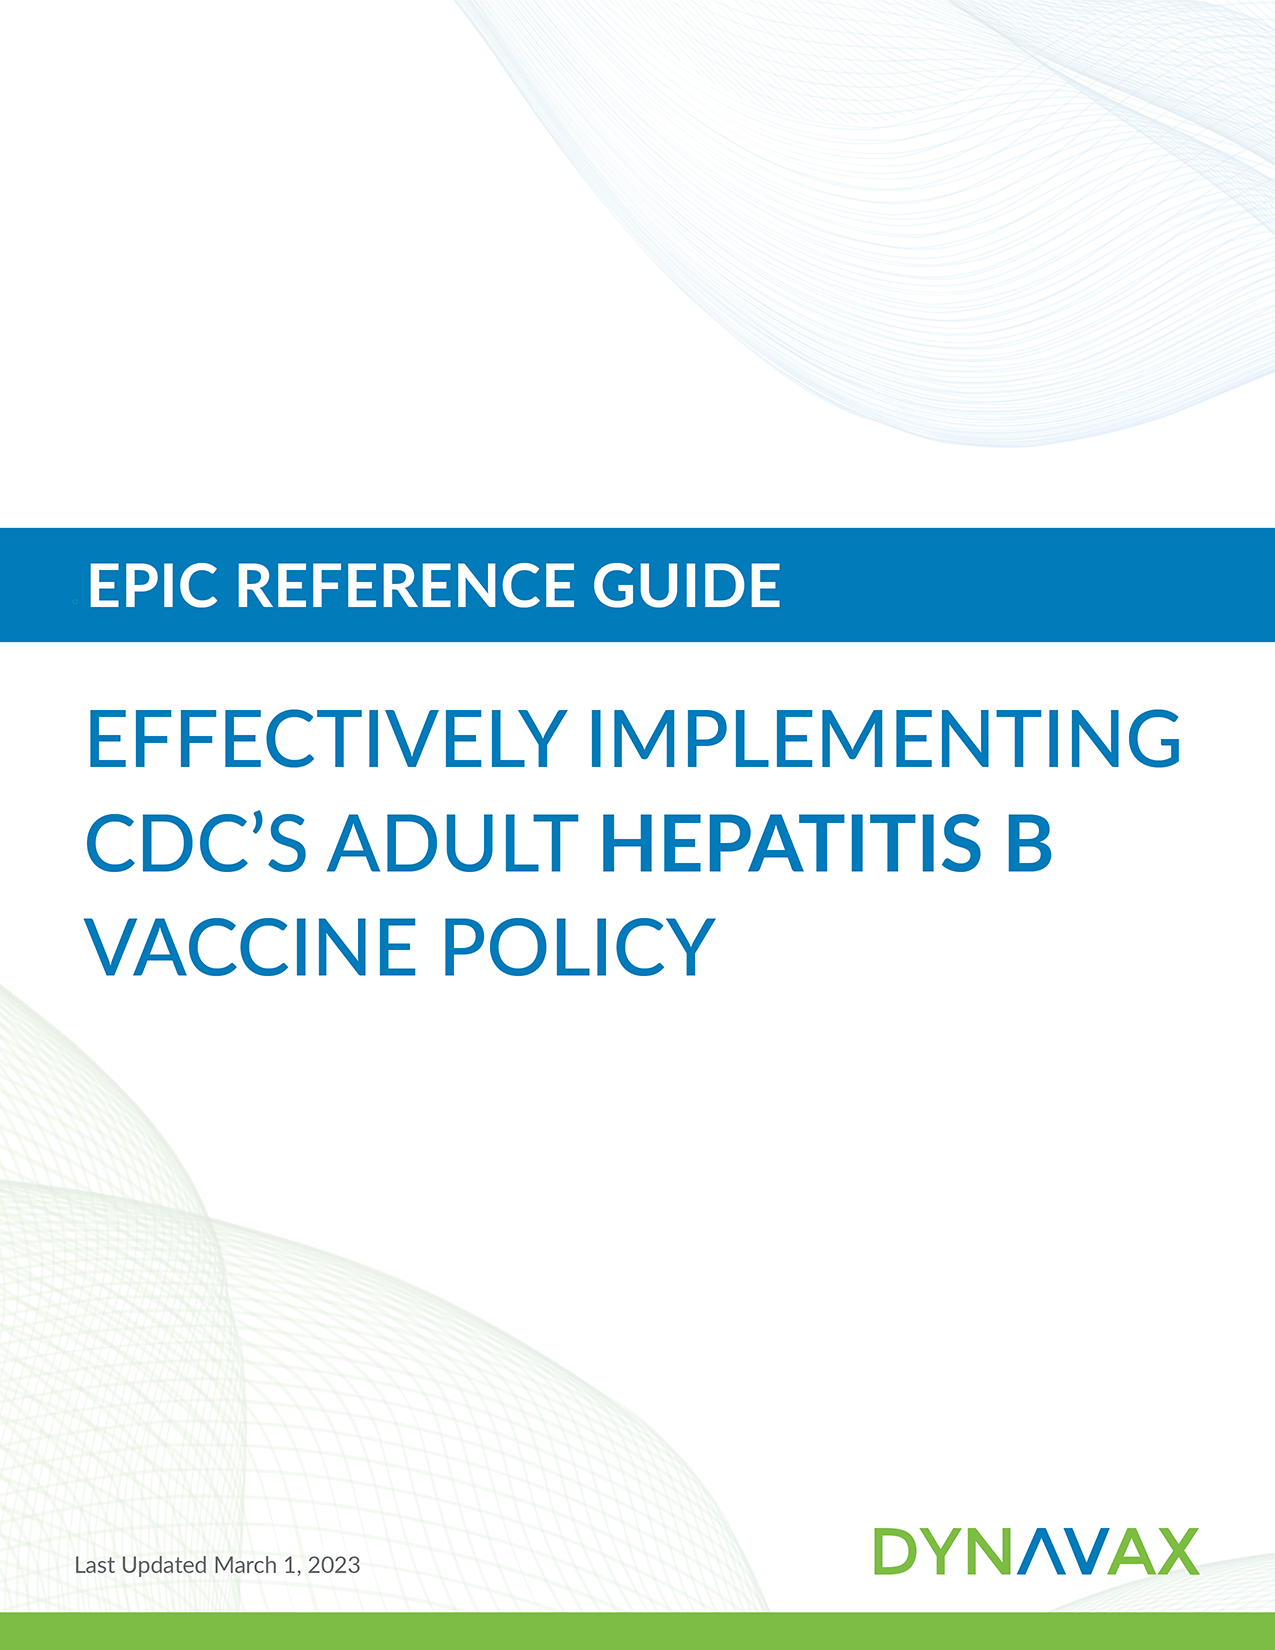 Epic Reference Guide for implementing the CDC adult hepatitis B vaccine policy.